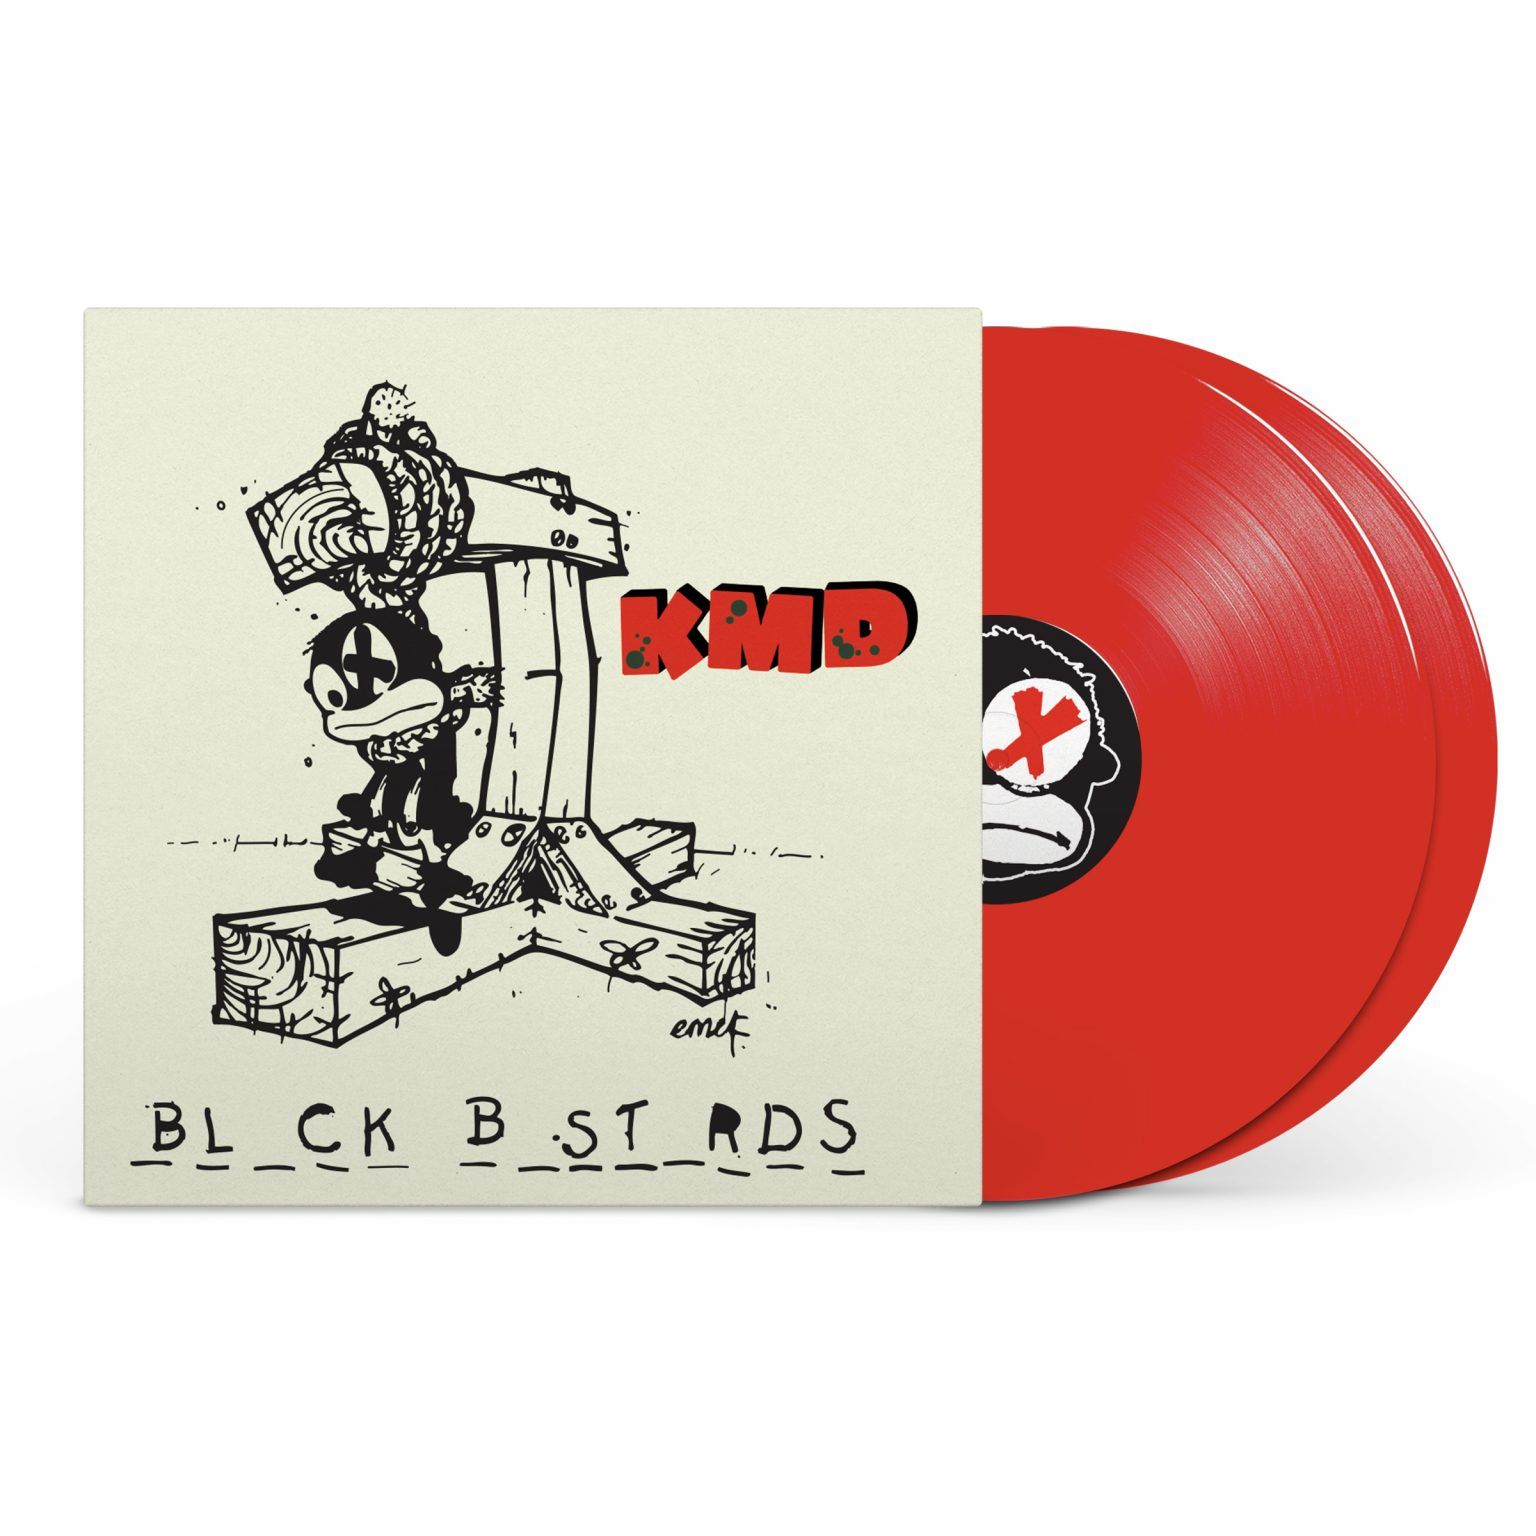 Bl_ck B_st_rds: Limited Edition Red Vinyl 2LP